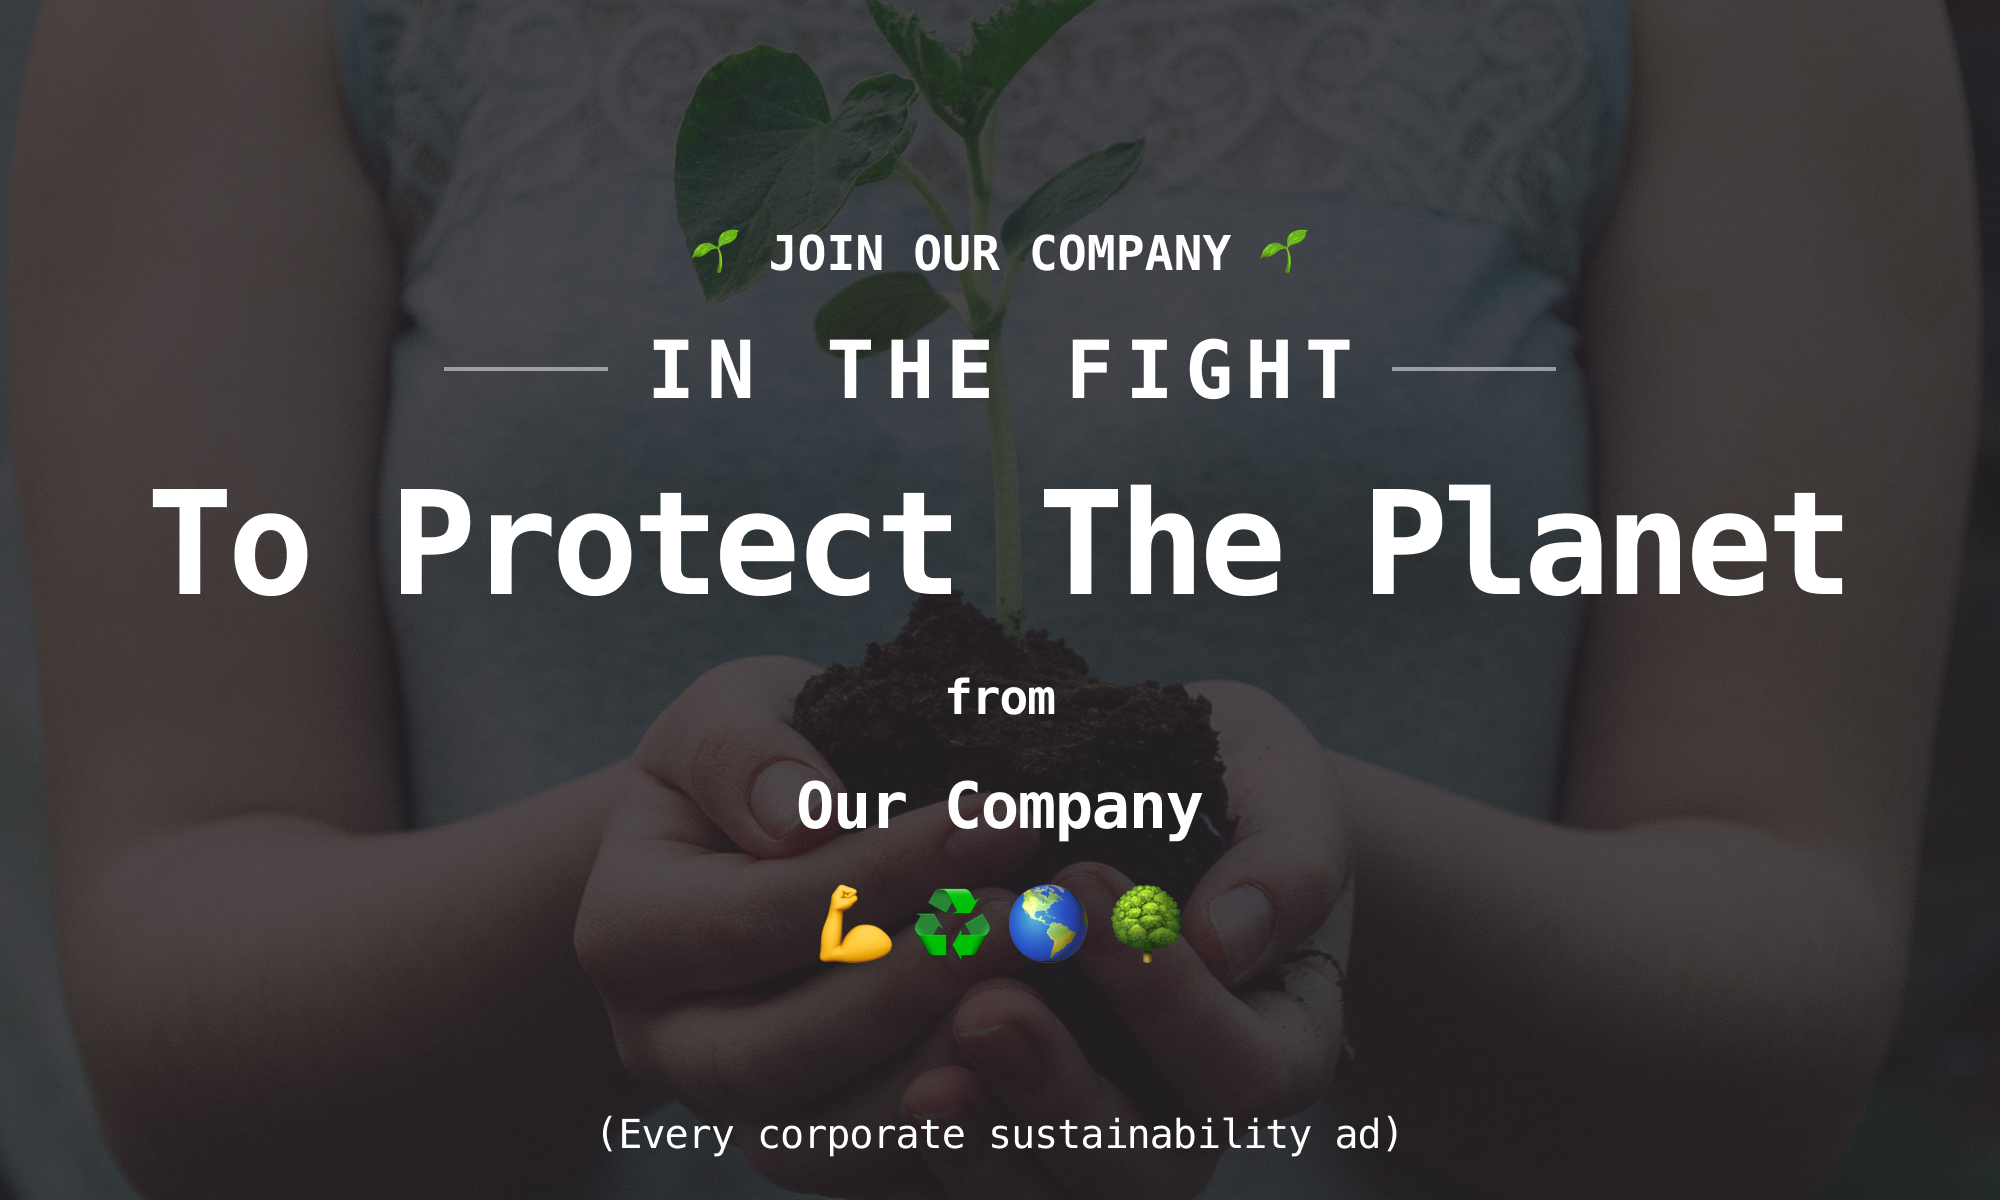 A faux ad poking fun at corporate climate pledges. It reads 'Join our company in the fight to protect the planet from our company.' in a number of differnet fonts and emojis.